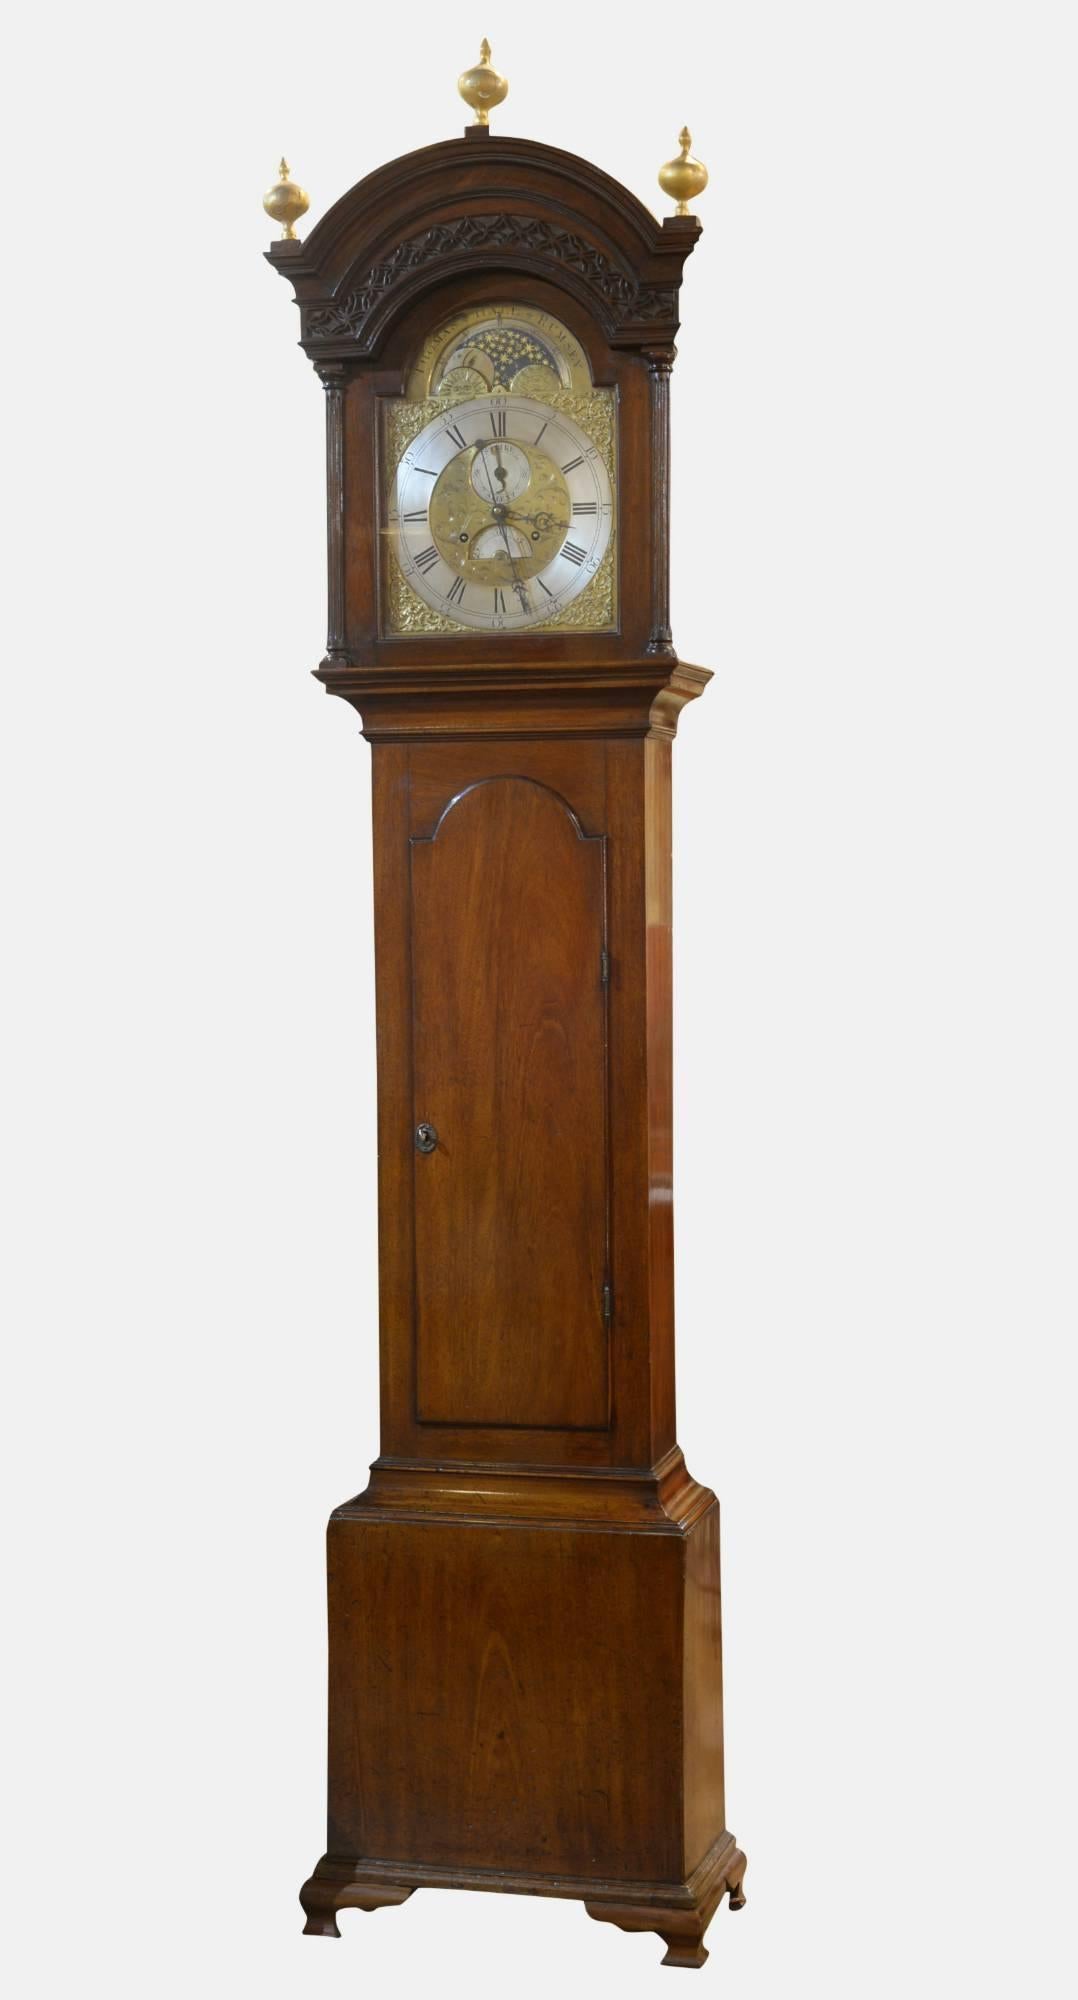 An 18th century mahogany 8 day longcase clock by Thomas Hall of Romsey. Strike/silent feature, moon phase and centre seconds hand.